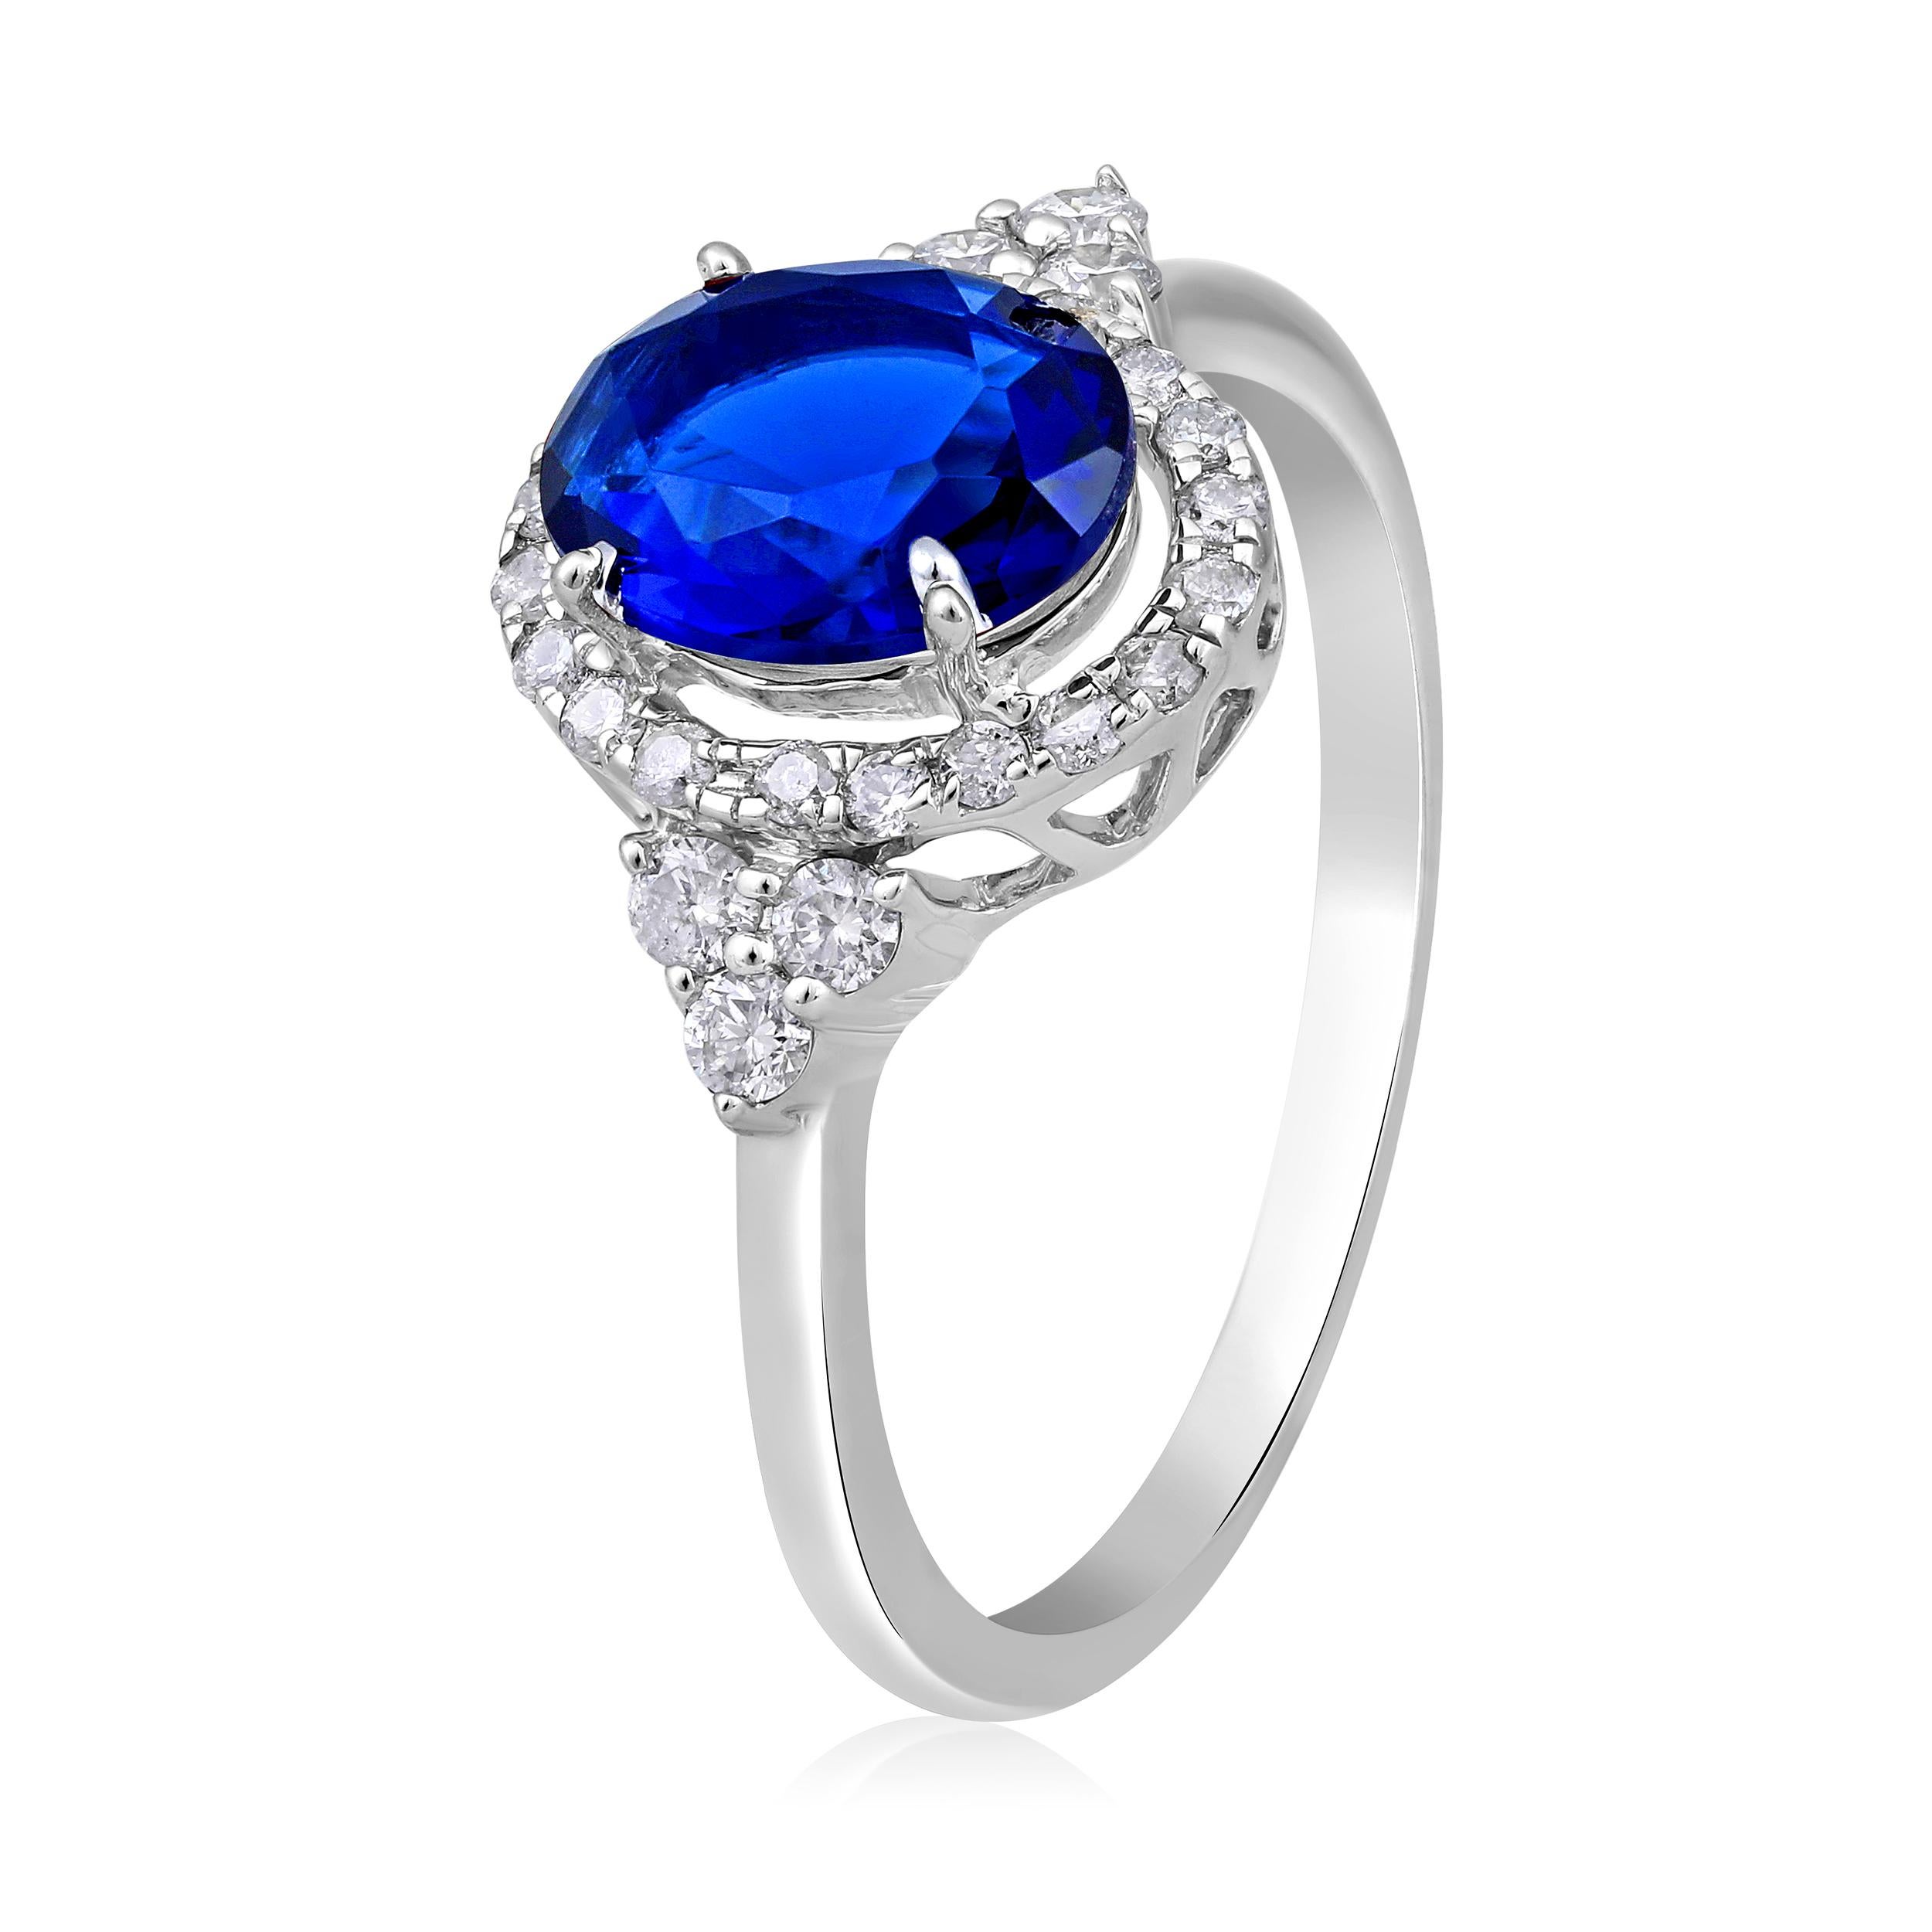 Ring Size: US 7 

Crafted in 2.47 grams of 10K White Gold, the ring contains 26 stones of Round Diamonds with a total of 0.291 carat in F-G color and I1-I2 clarity combined with 1 stone of Lab Created Sapphire Gemstone with a total of 1.045